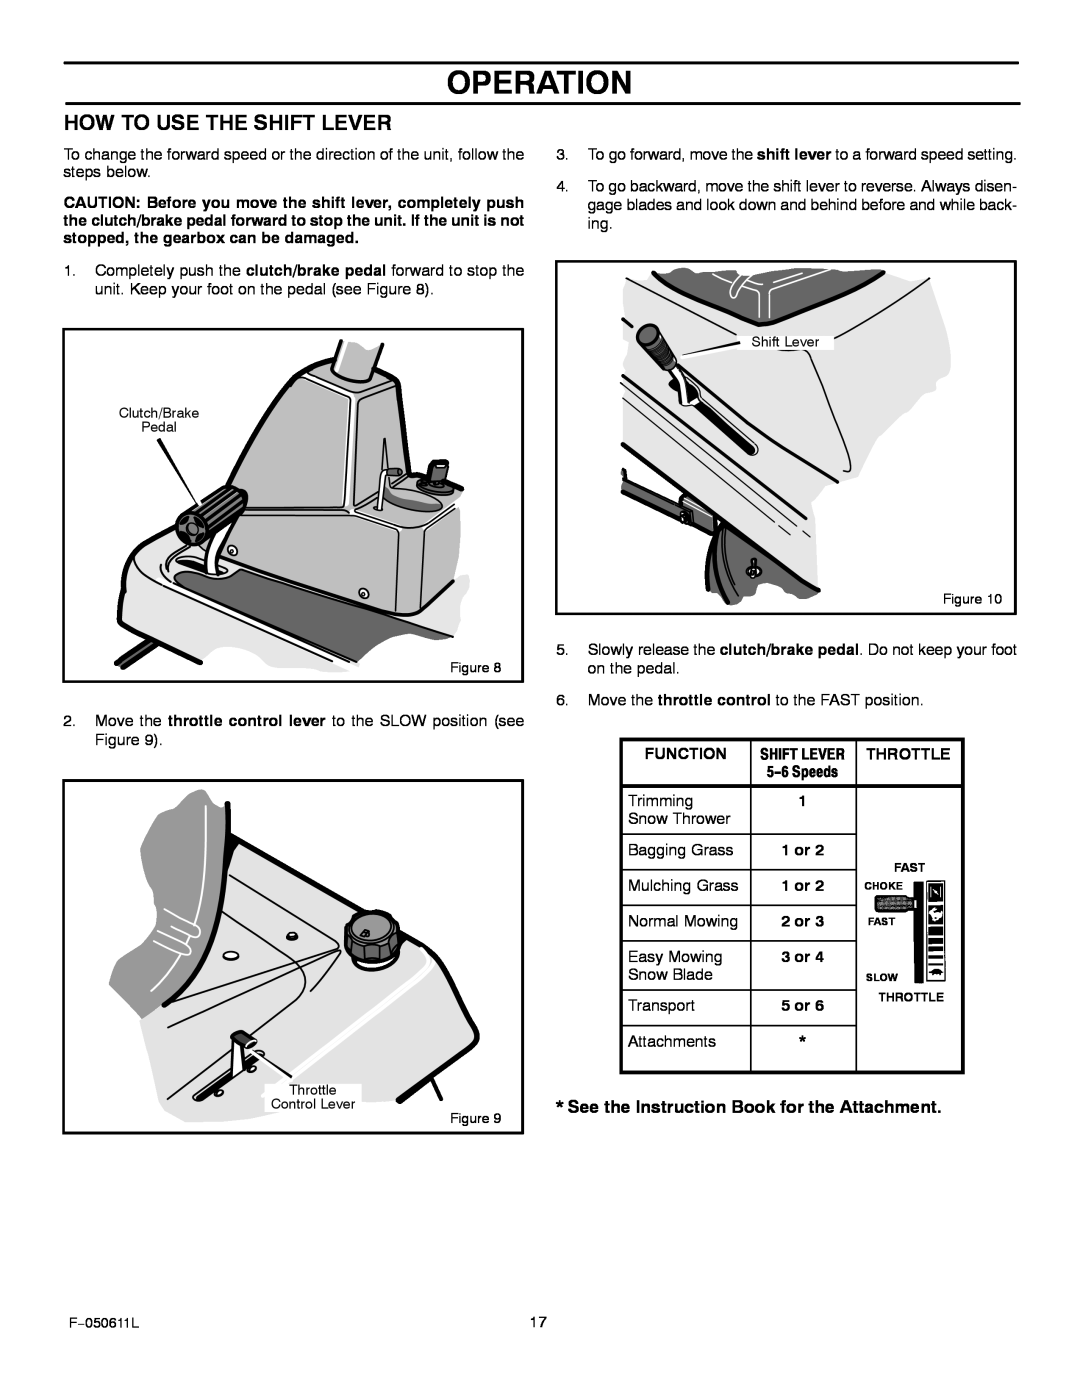 Murray 309007x8B manual How To Use The Shift Lever, Operation, See the Instruction Book for the Attachment 